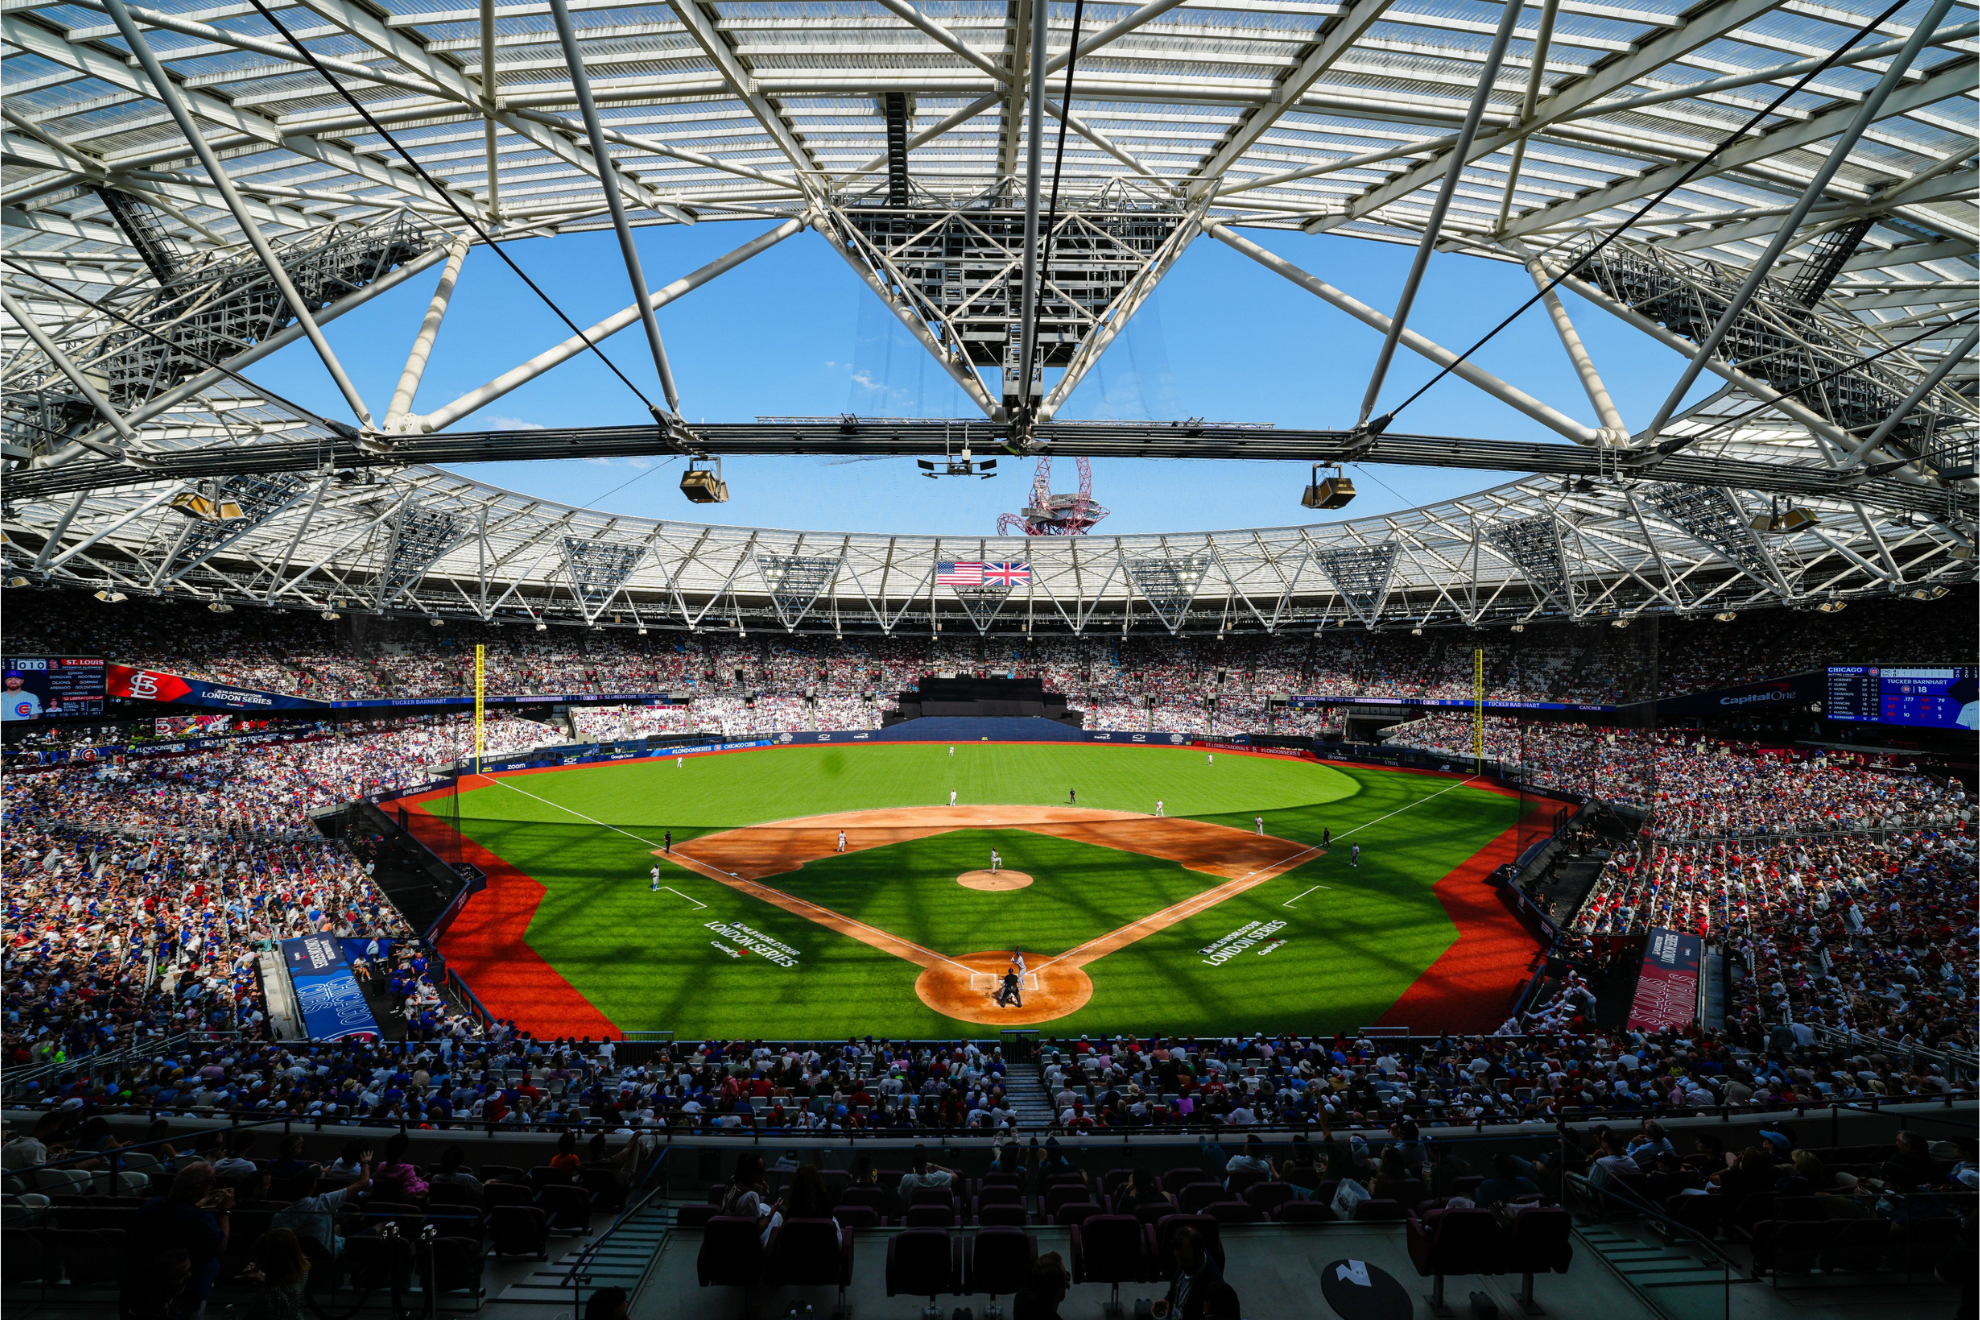 London Stadium hosted a two-game MLB series between the Chicago Cubs and St. Louis Cardinals.